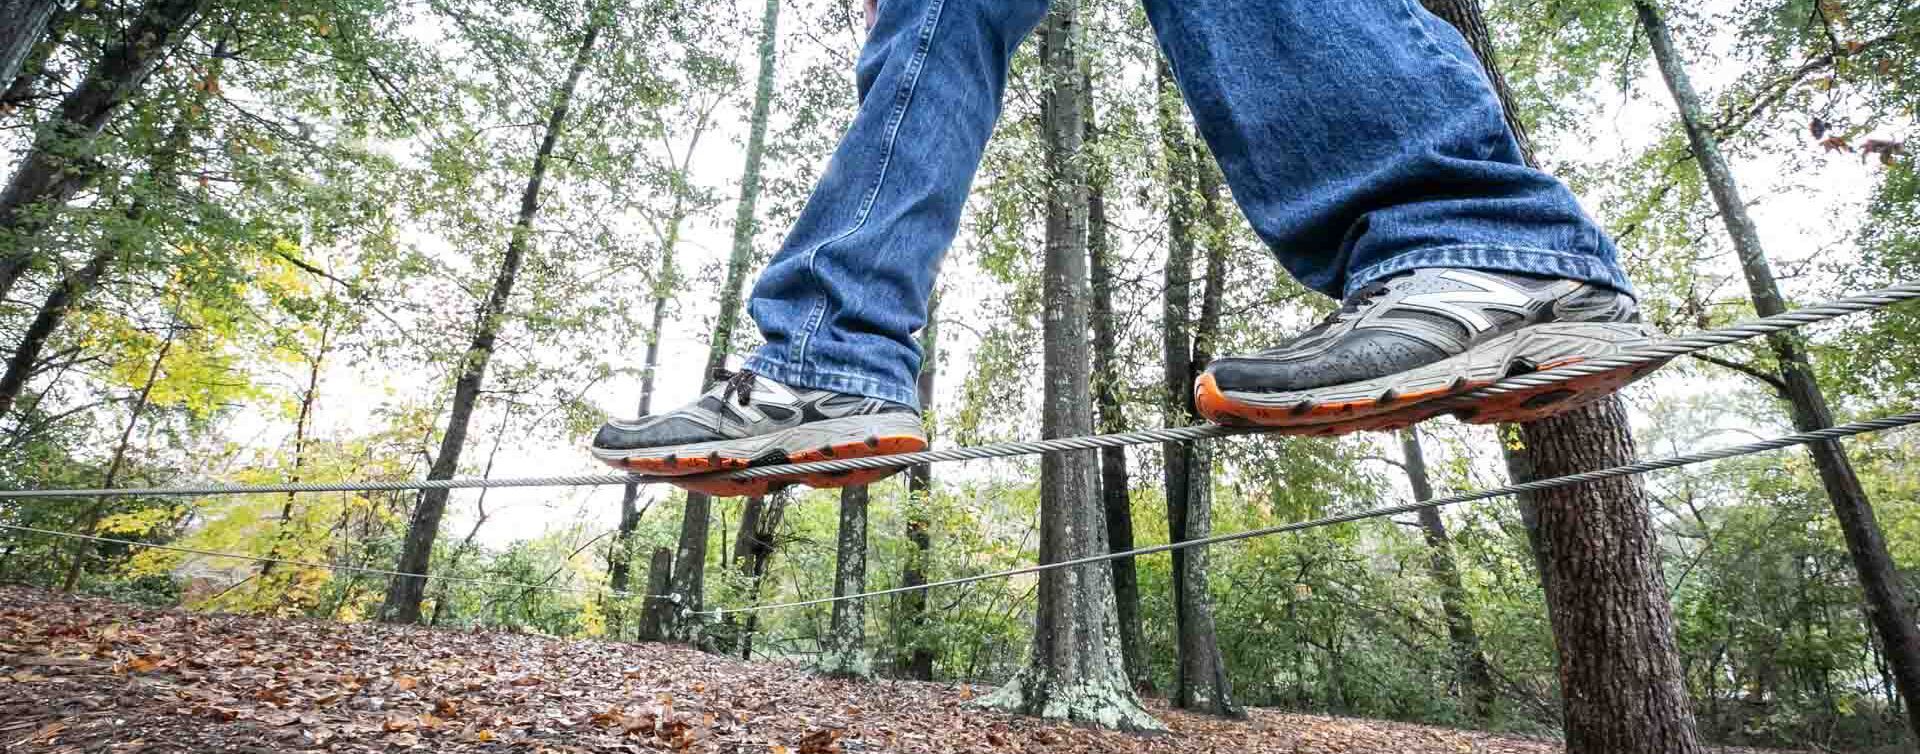 Pair of legs walking on a rope at the YMCA outdoor activities